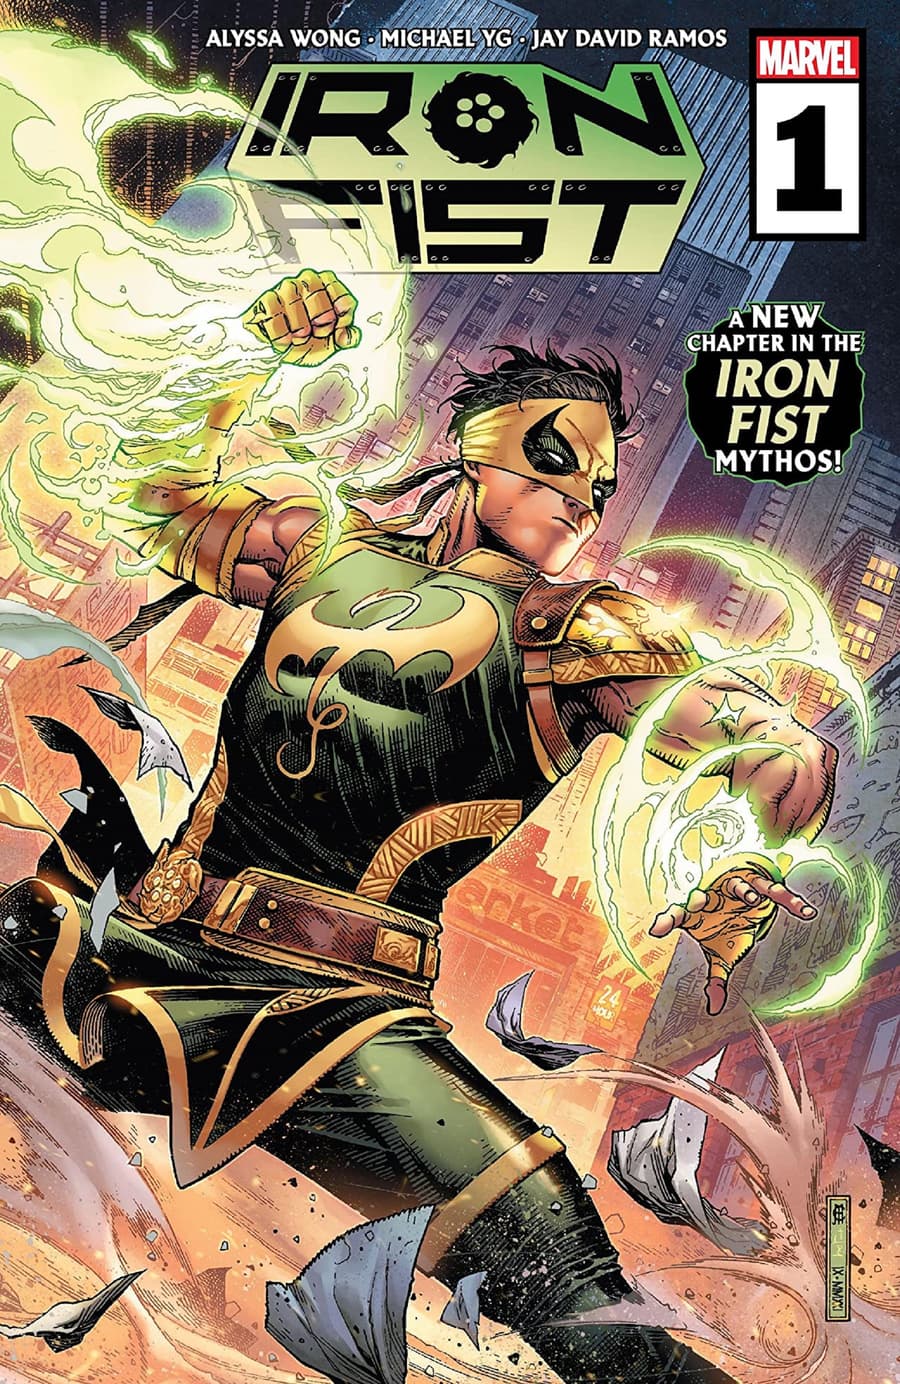 Cover to Iron Fist (2022) #1.